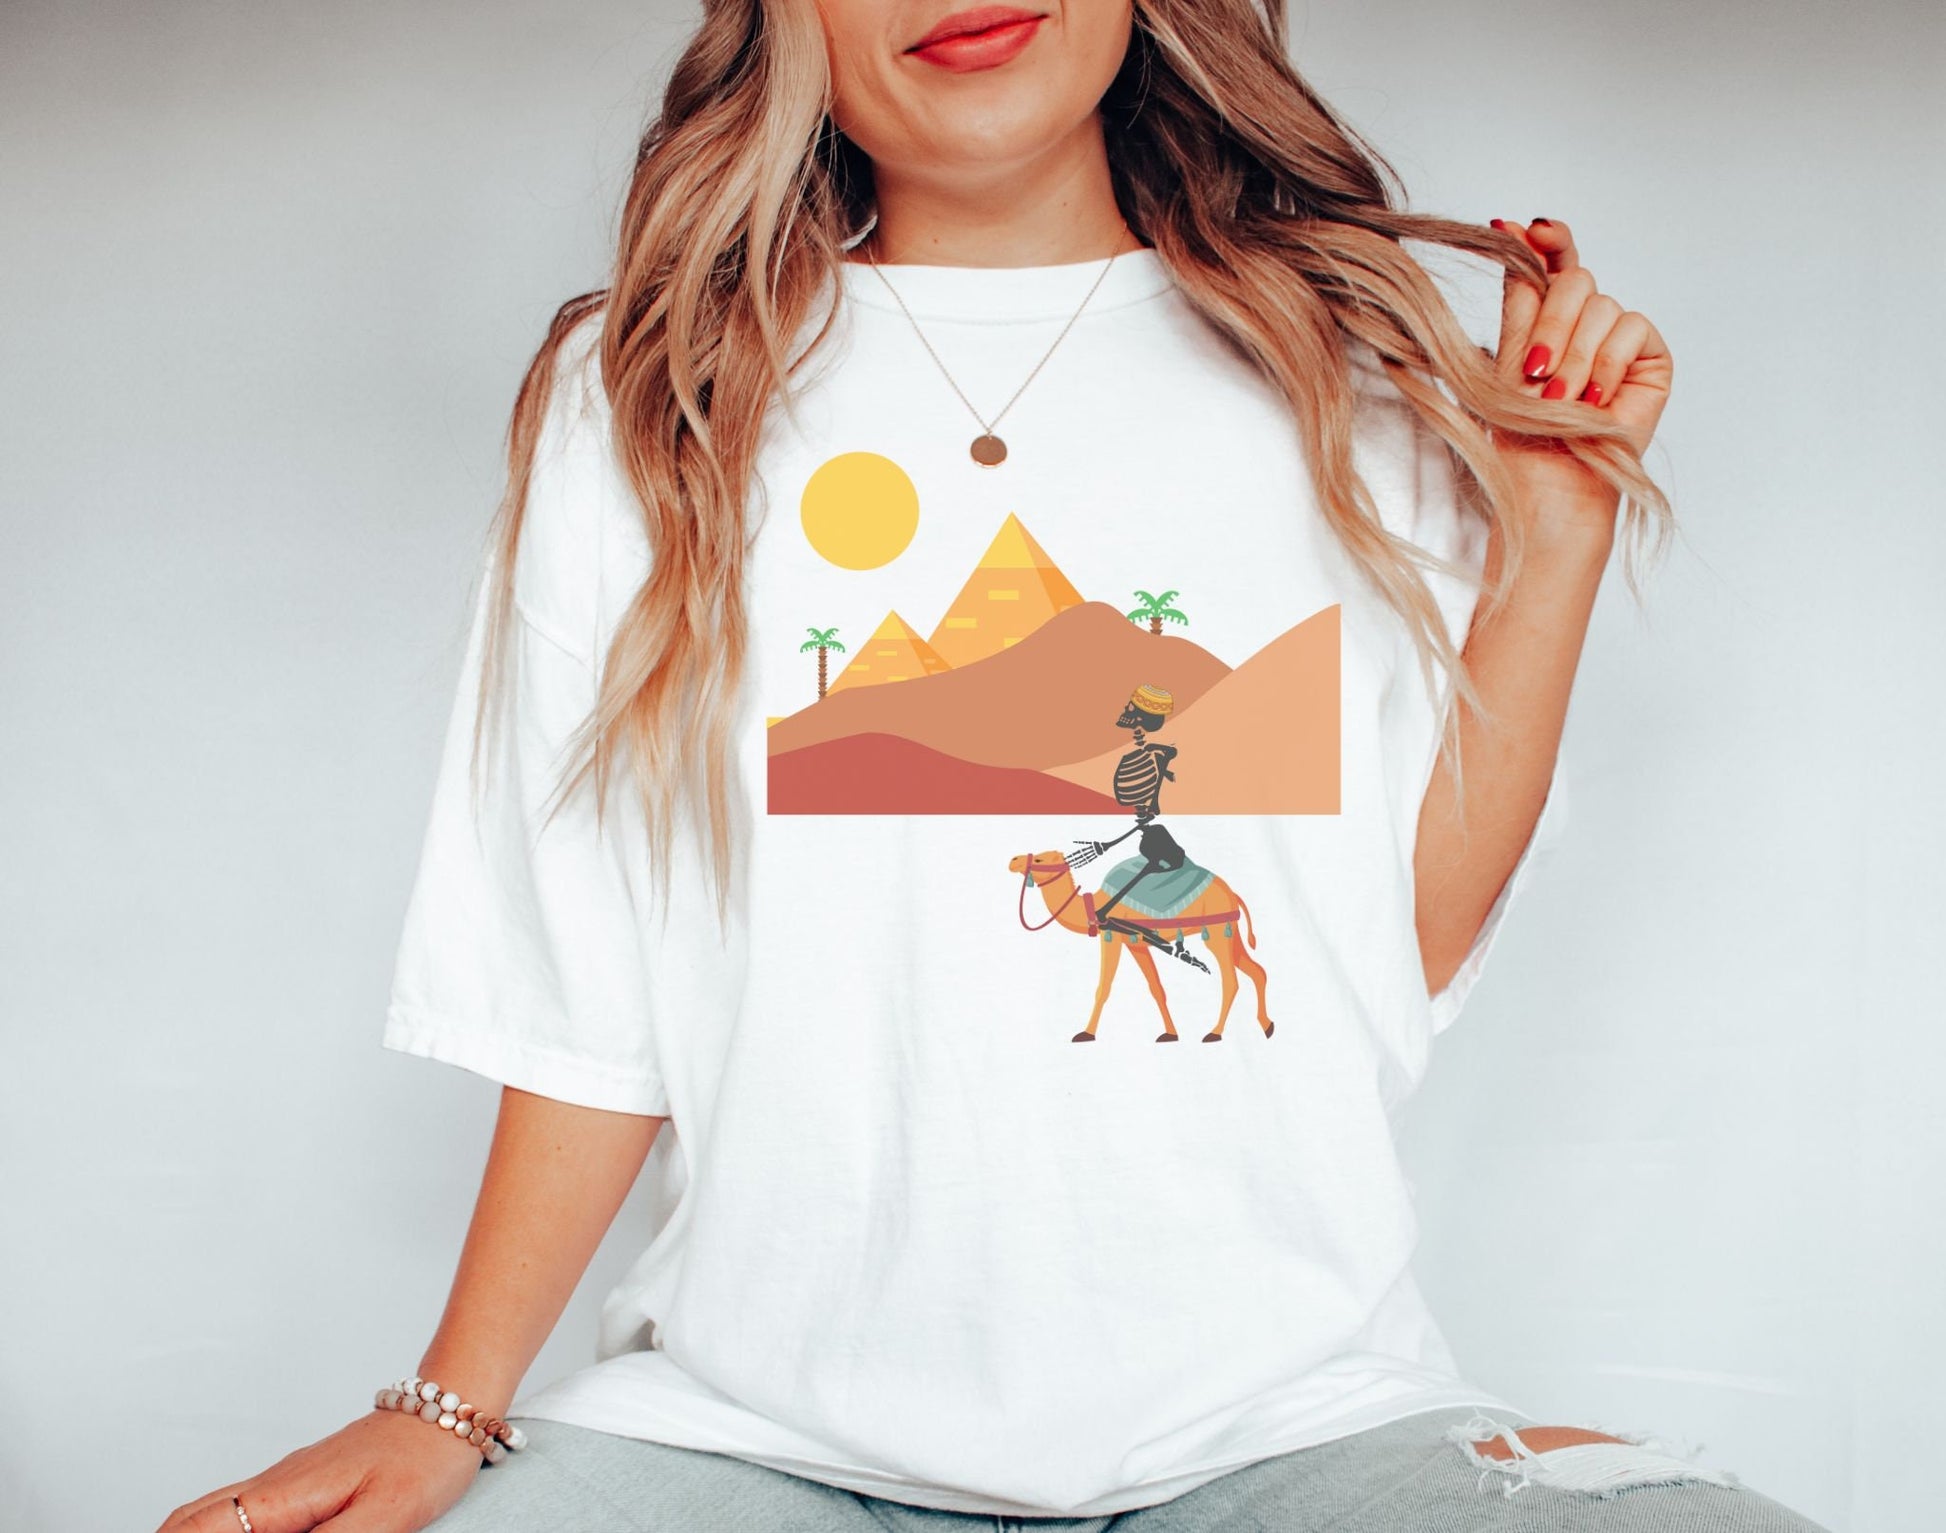 A woman wearing a cute, vintage white colored shirt with a skeleton wearing an Egyptian hat riding a brown camel through the desert, the Egyptian pyramids in the distance behind sand dunes and palm trees with the sun high in the sky.